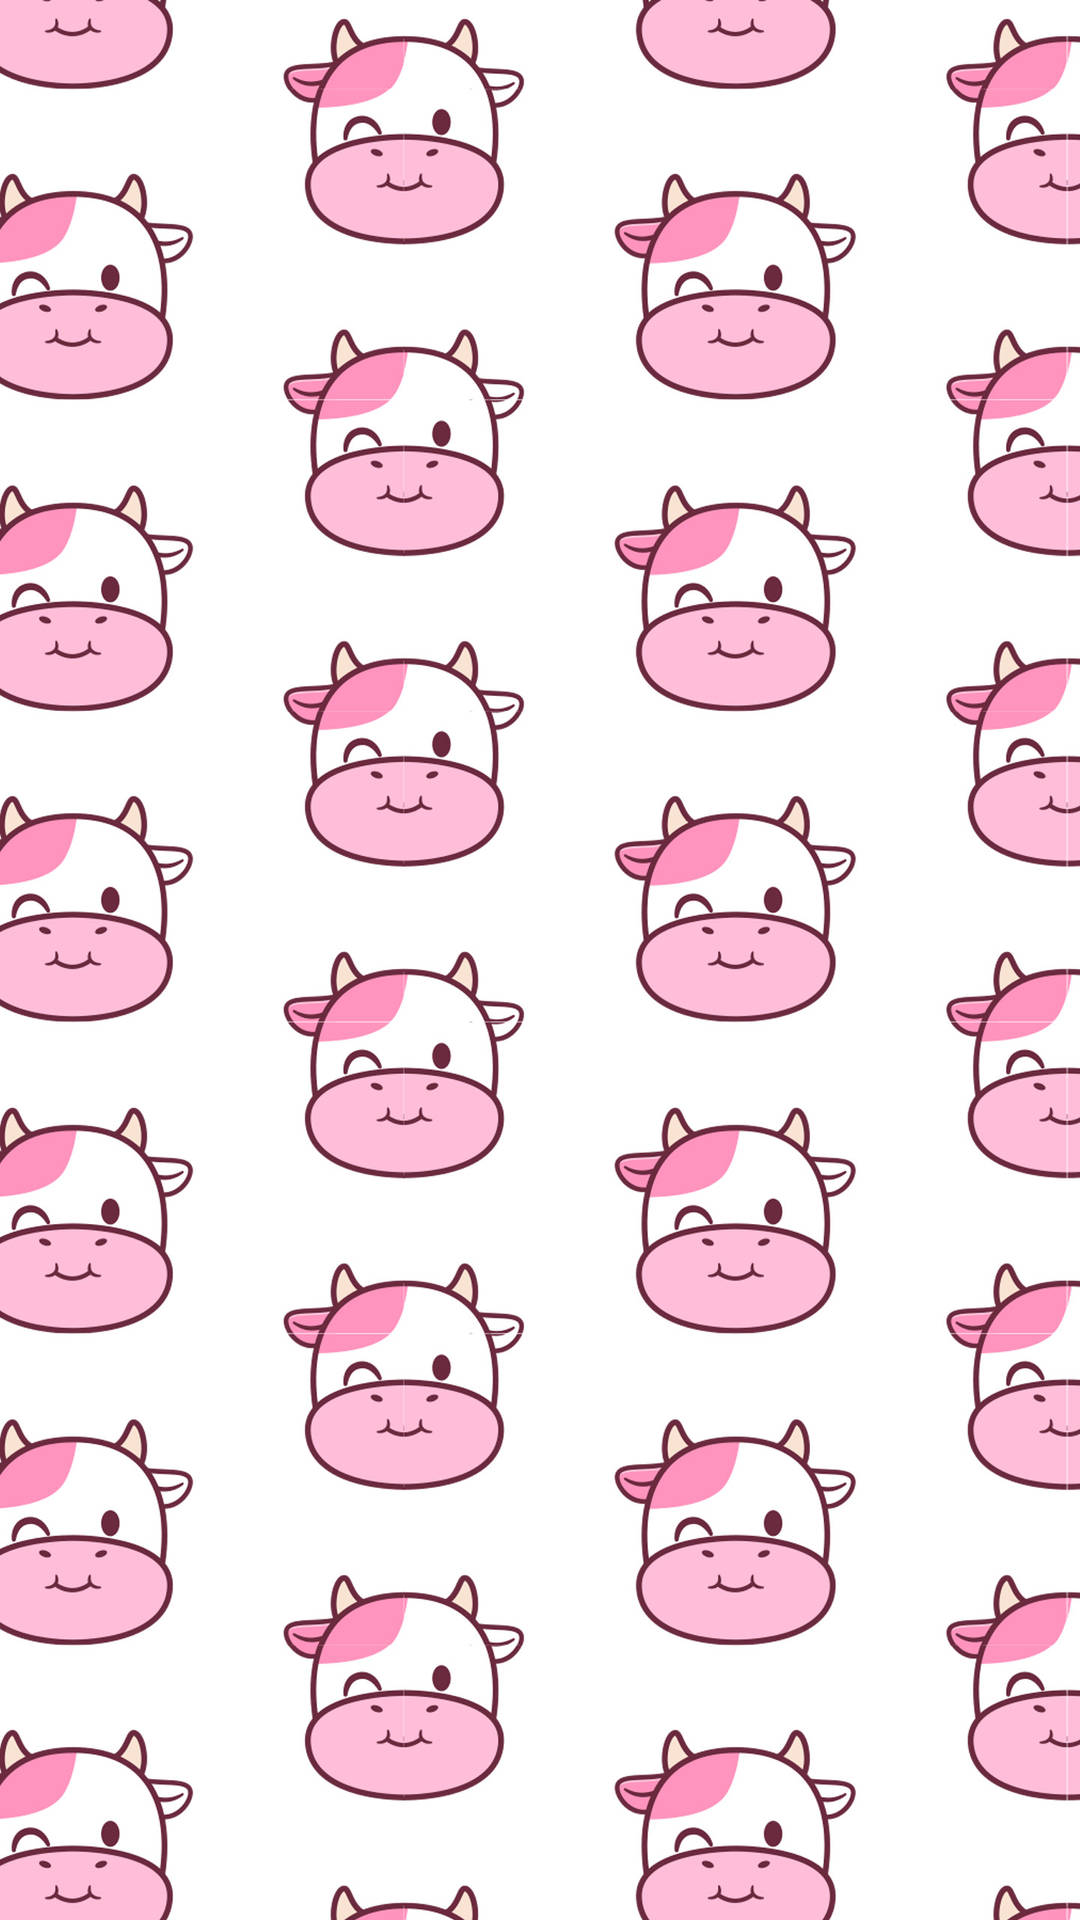 Strawberry Cow Winking Tiled Wallpaper